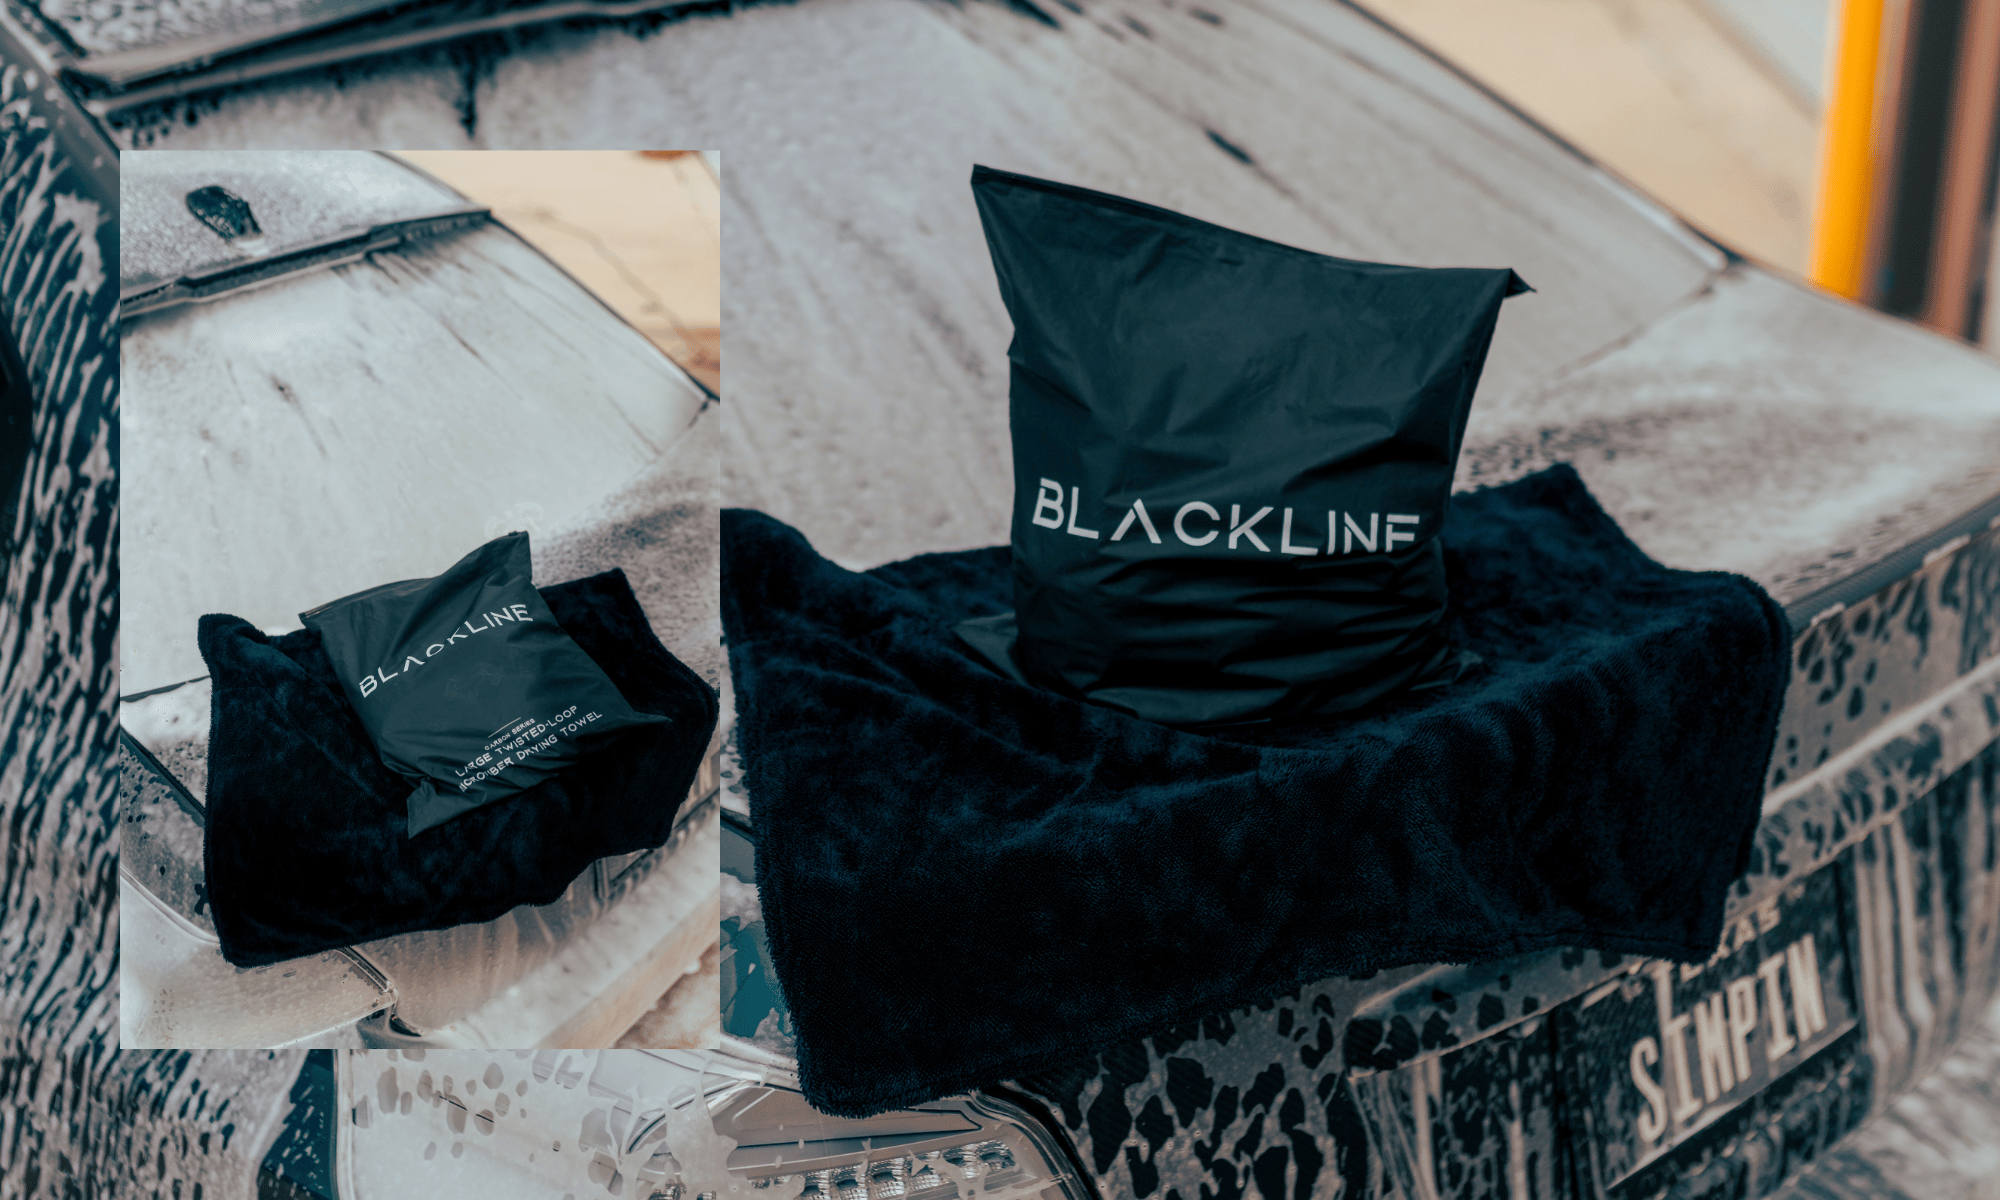 The @Blackline Car Care drying towel really works! Use my code: COLE10